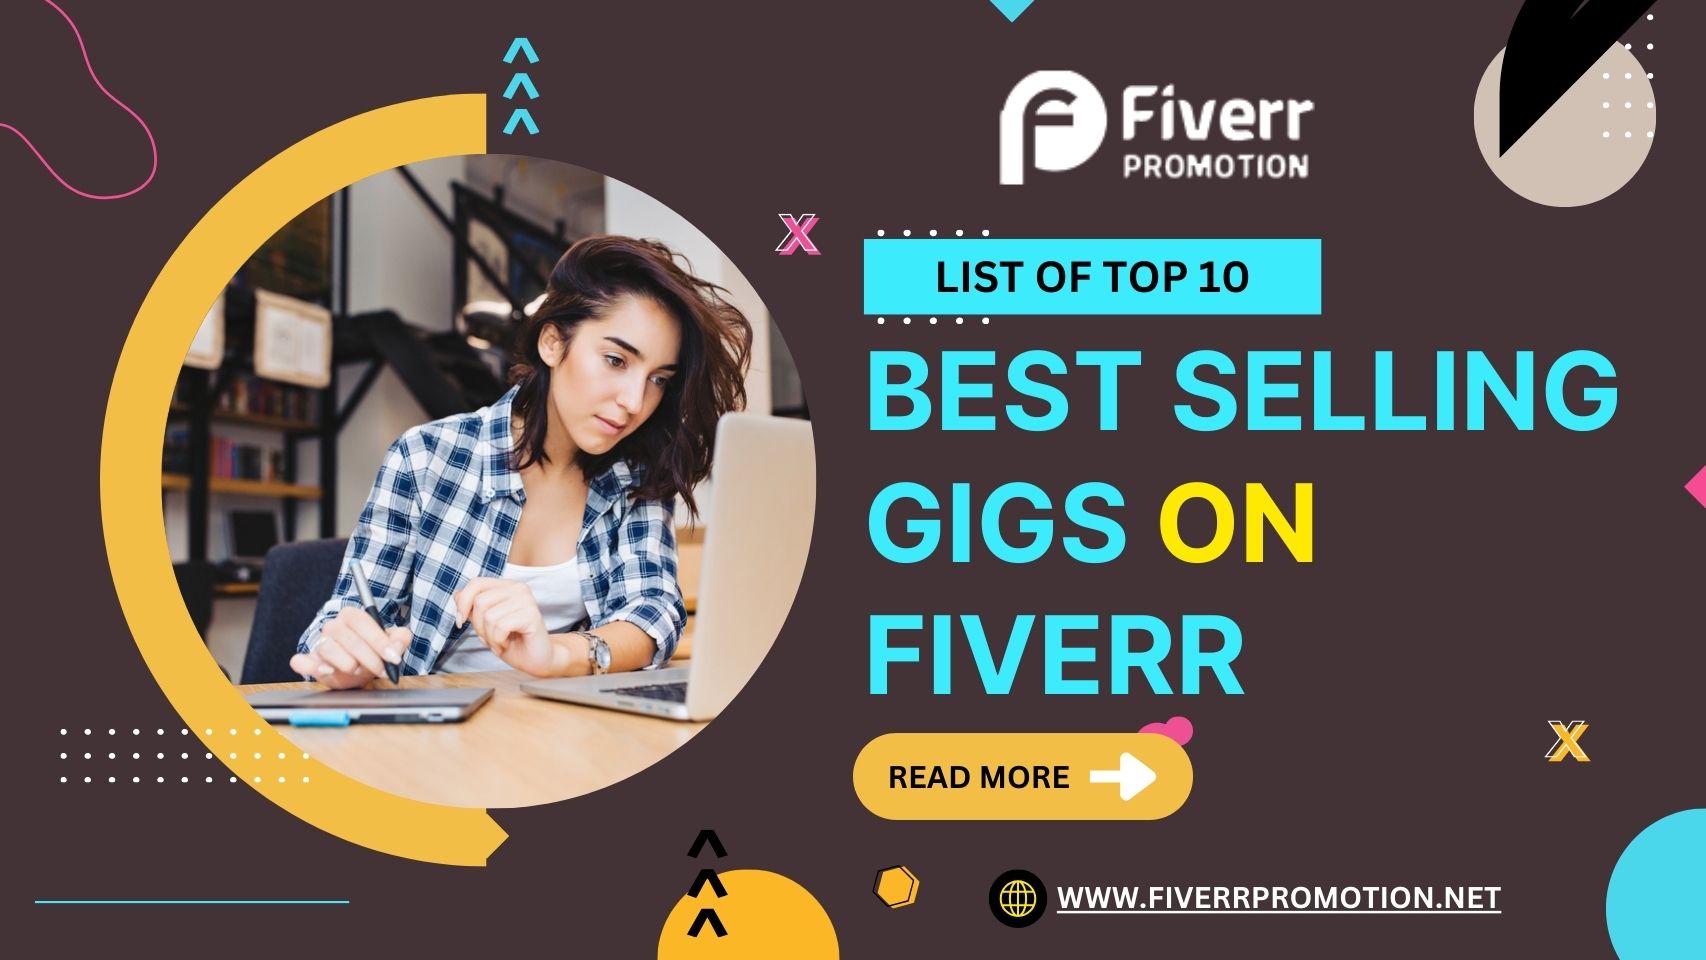 List of Top 10 Best Selling Gigs on Fiverr